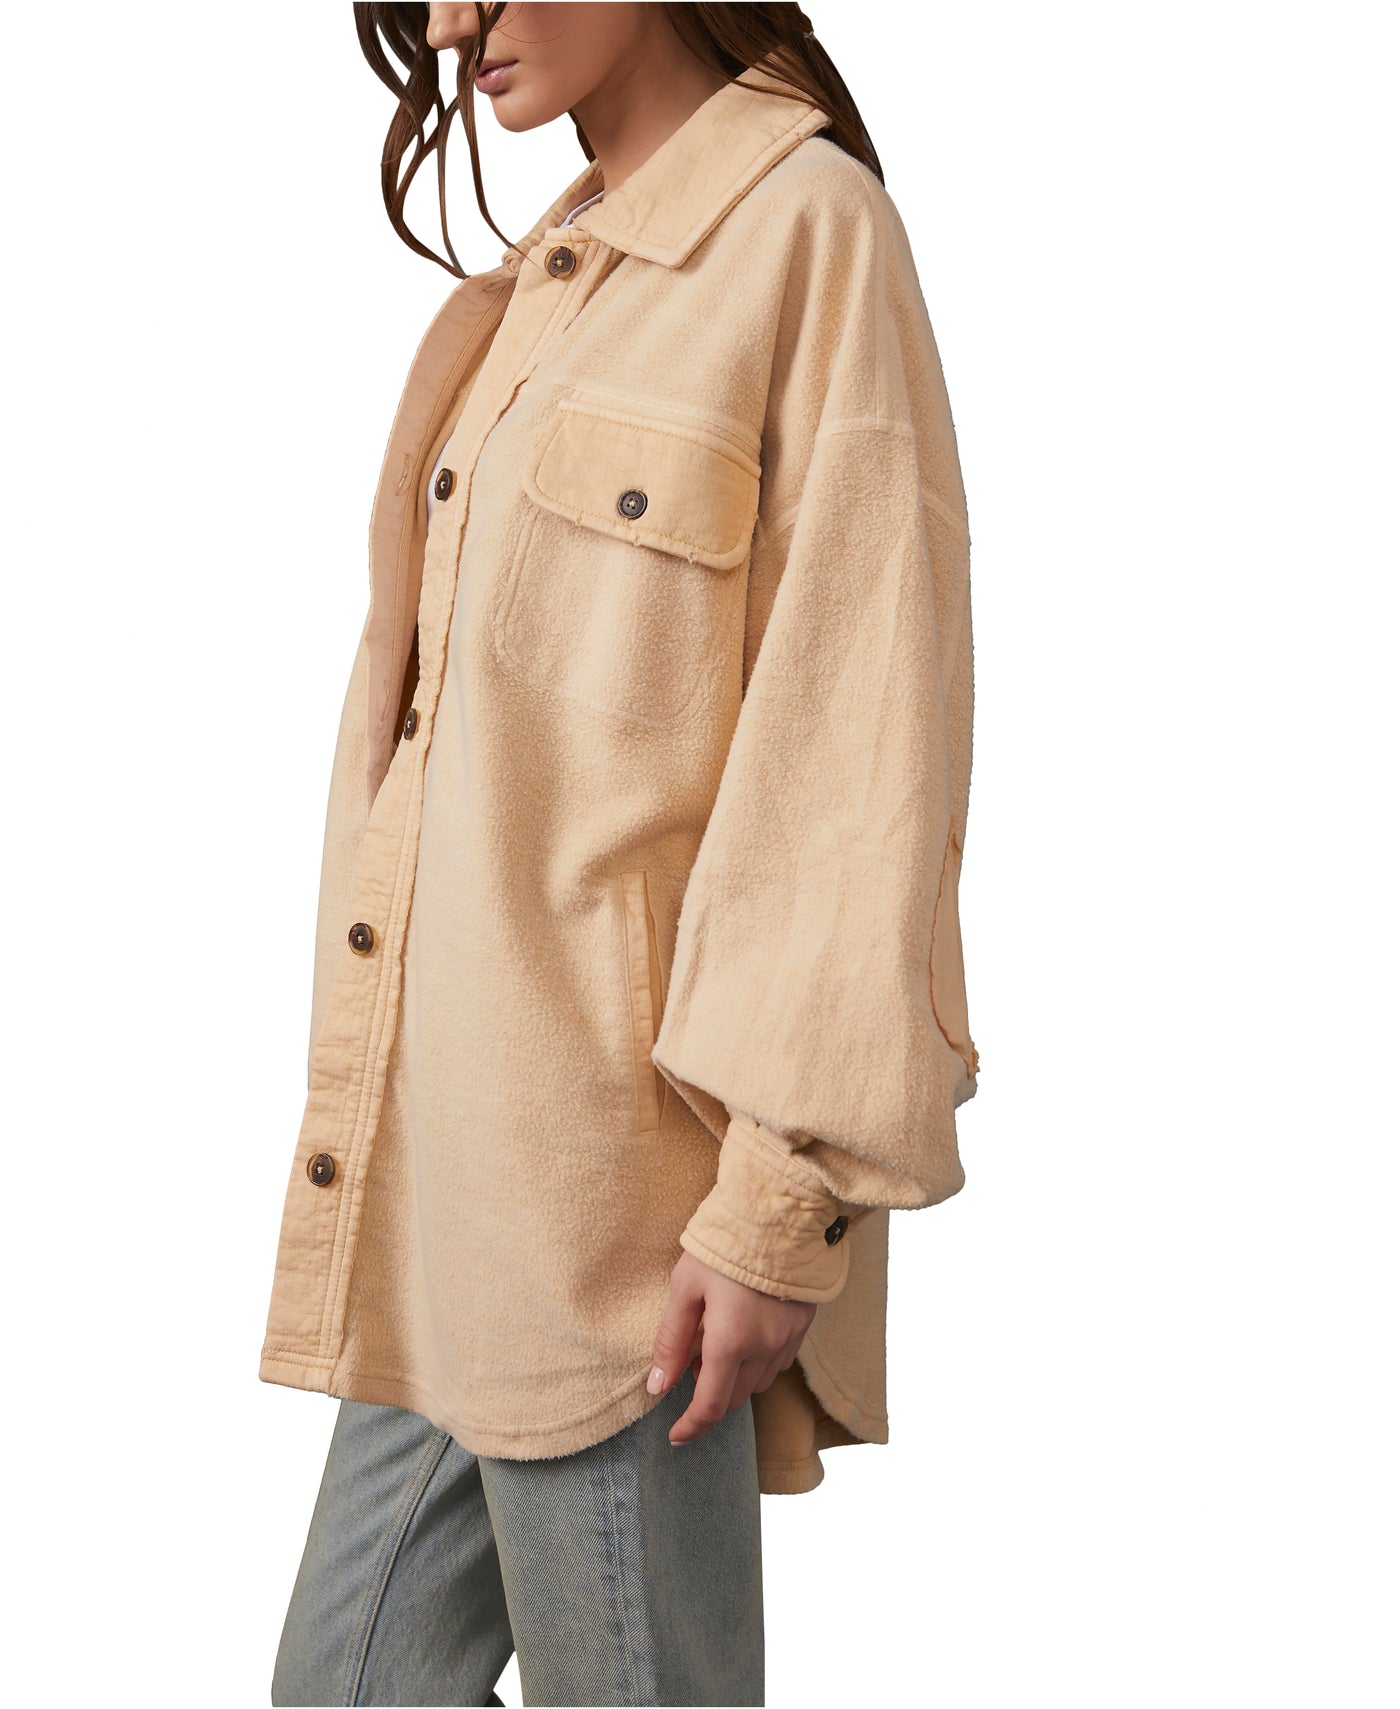 Ruby Jacket in Mustard Seed - Madison's Niche 